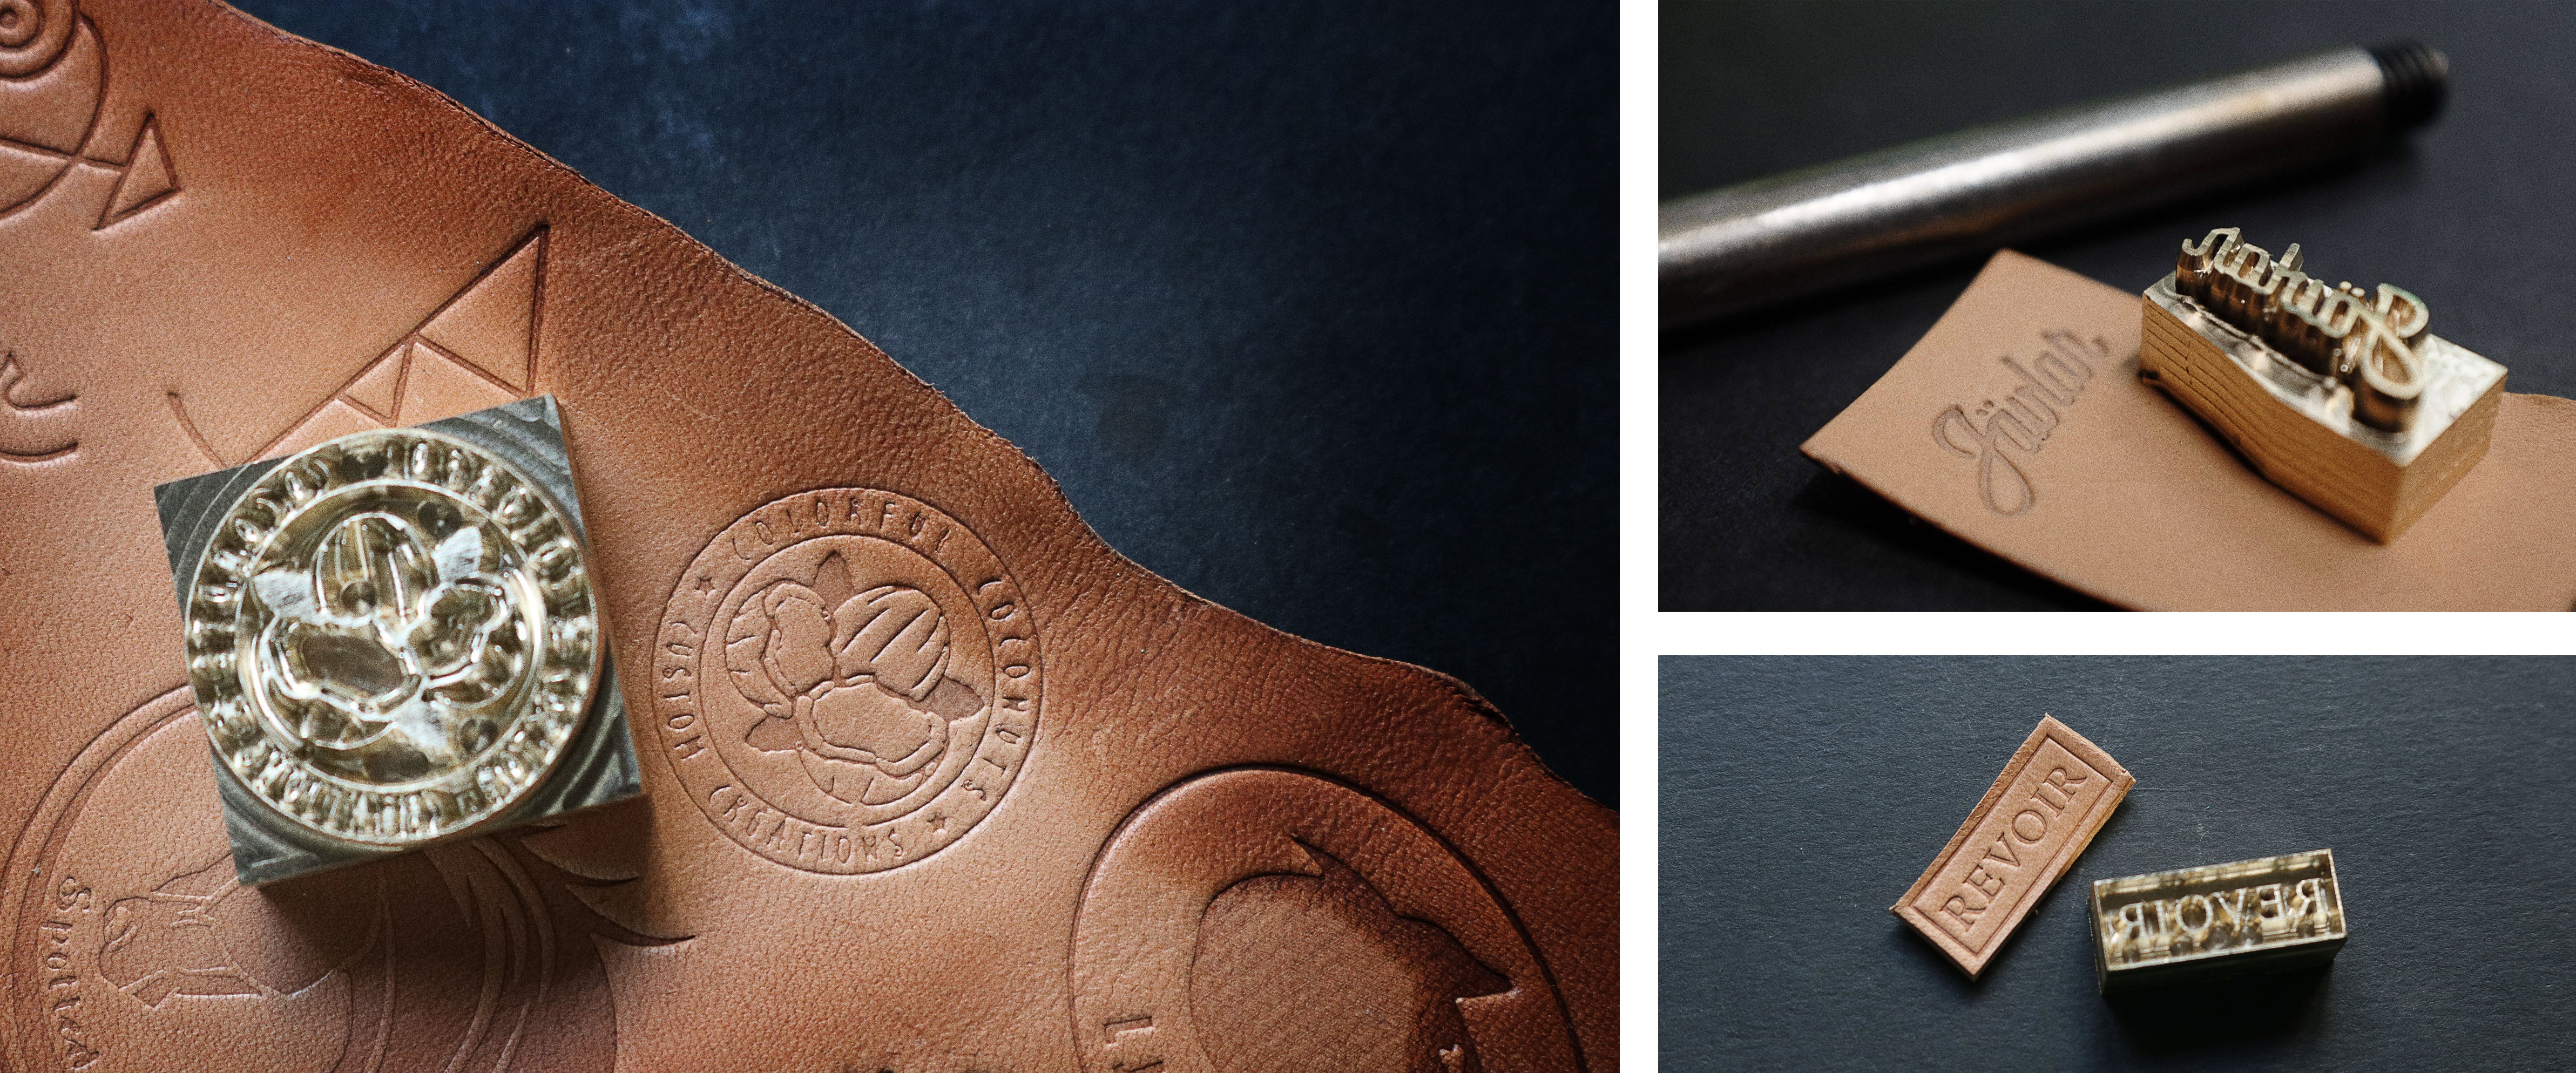 CUSTOM-MADE leather stamps – AM leathercraft